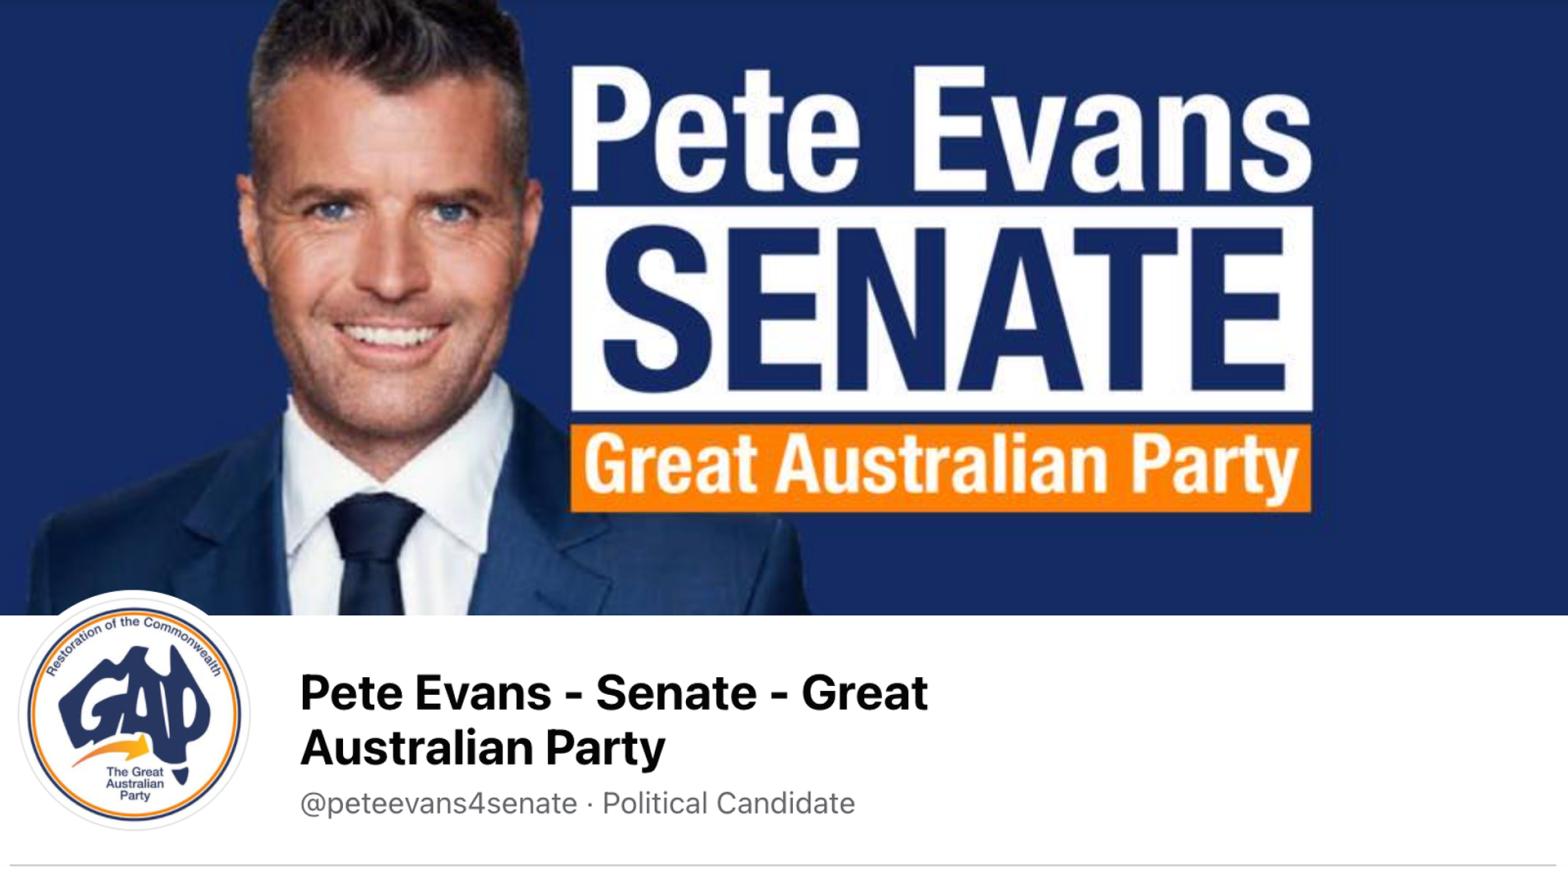 Pete Evans is back on Facebook with a political Page and the company says it doesn't break the rules